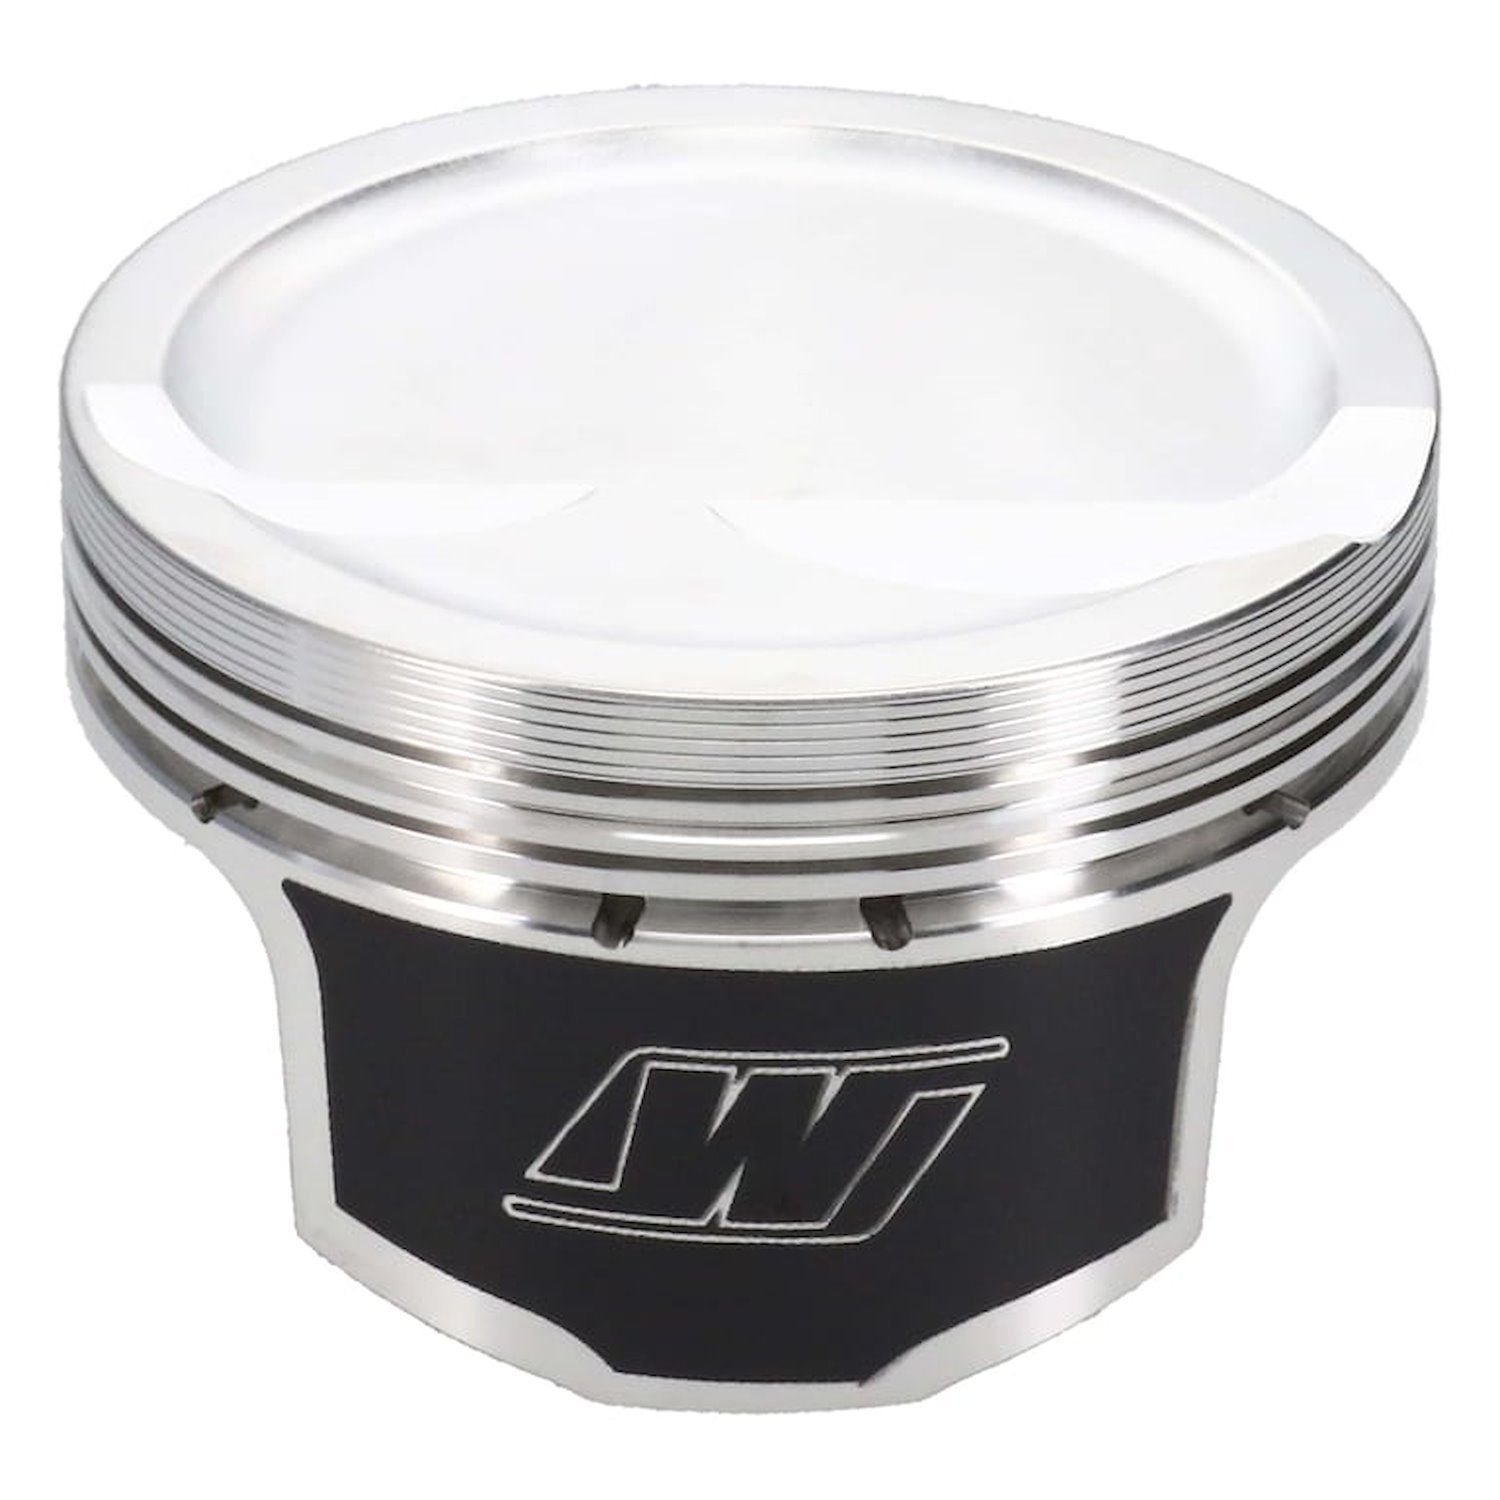 RED0081X135 RED-Series Piston Set, Chevy LS, 4.135 in. Bore, -15 cc Dish